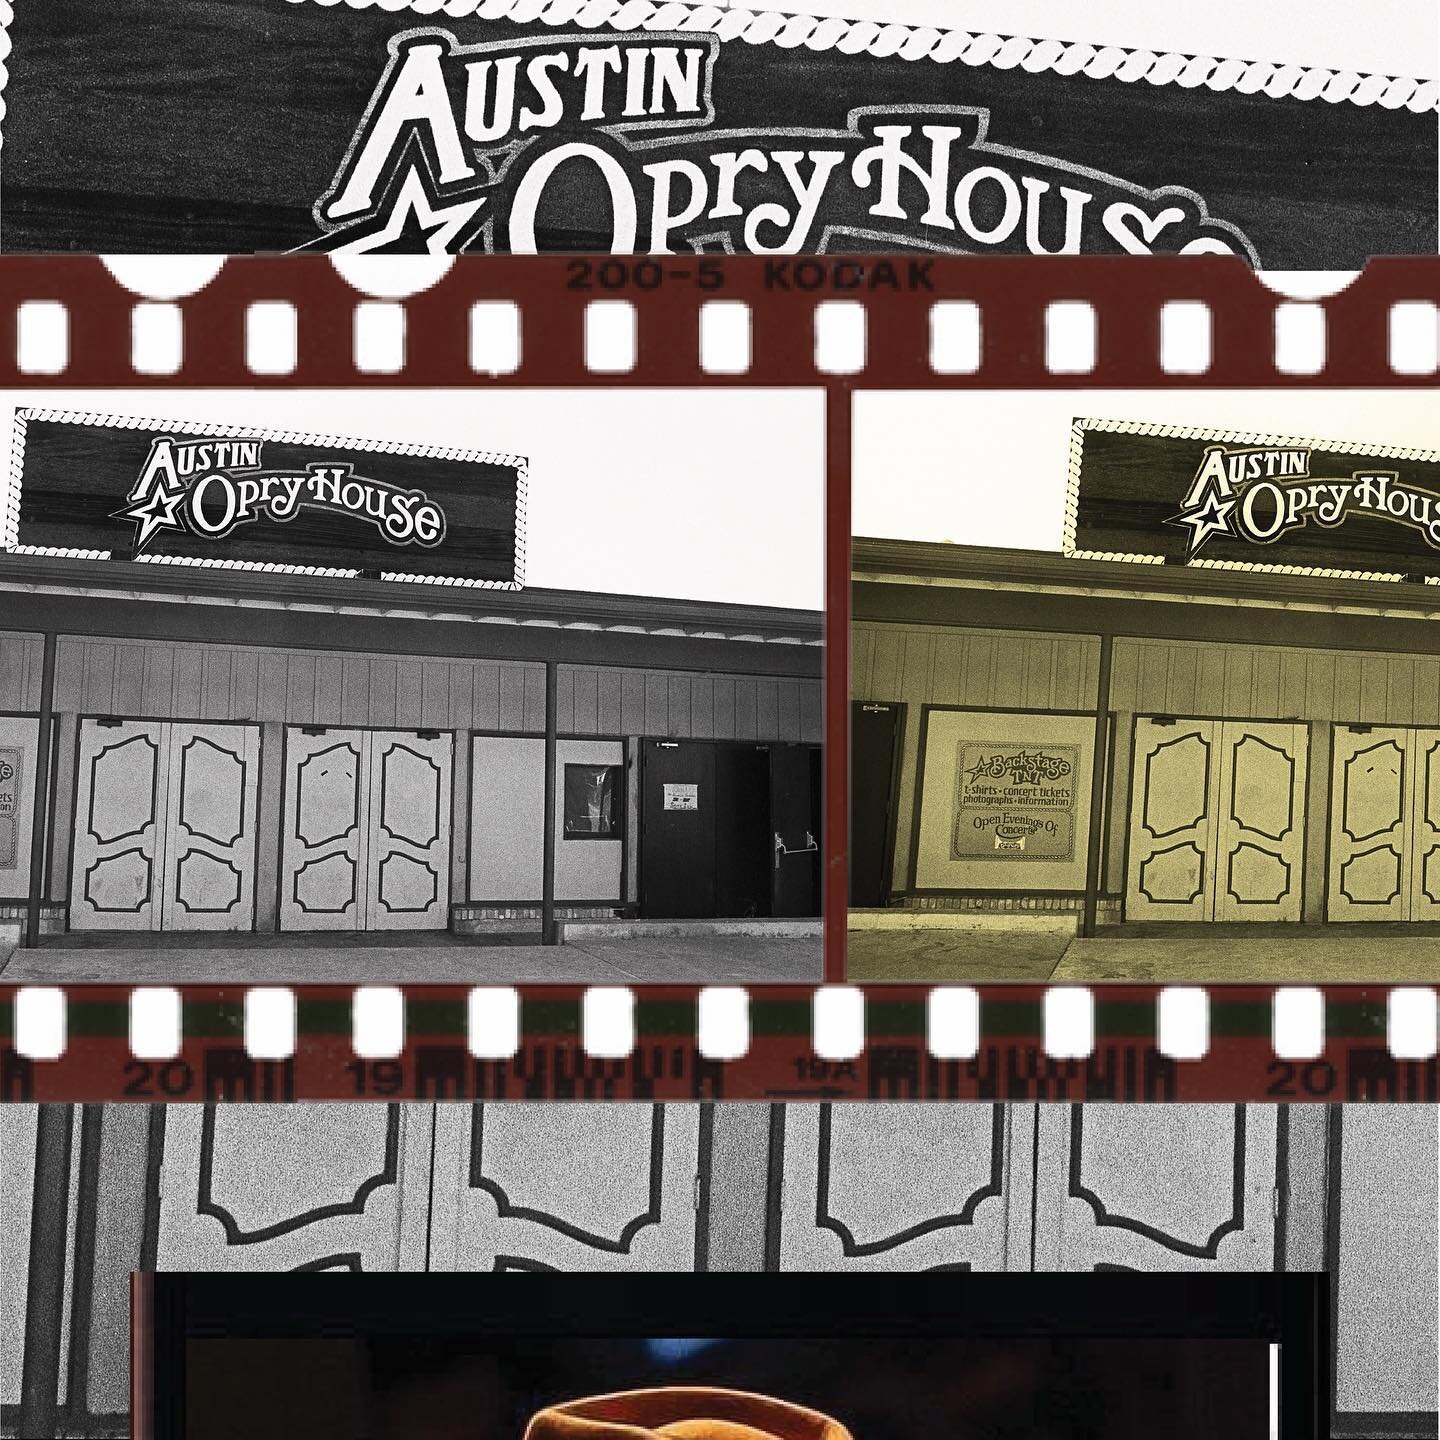 ACT NOW: Help save Austin Opera House and @Arlynstudios! Learn more and easily email the Austin City Council by visiting 200AcademyDrive.com. Zoning hearing coming up on January 27th!&nbsp;

In 1977, what would become an Austin institution popped up 